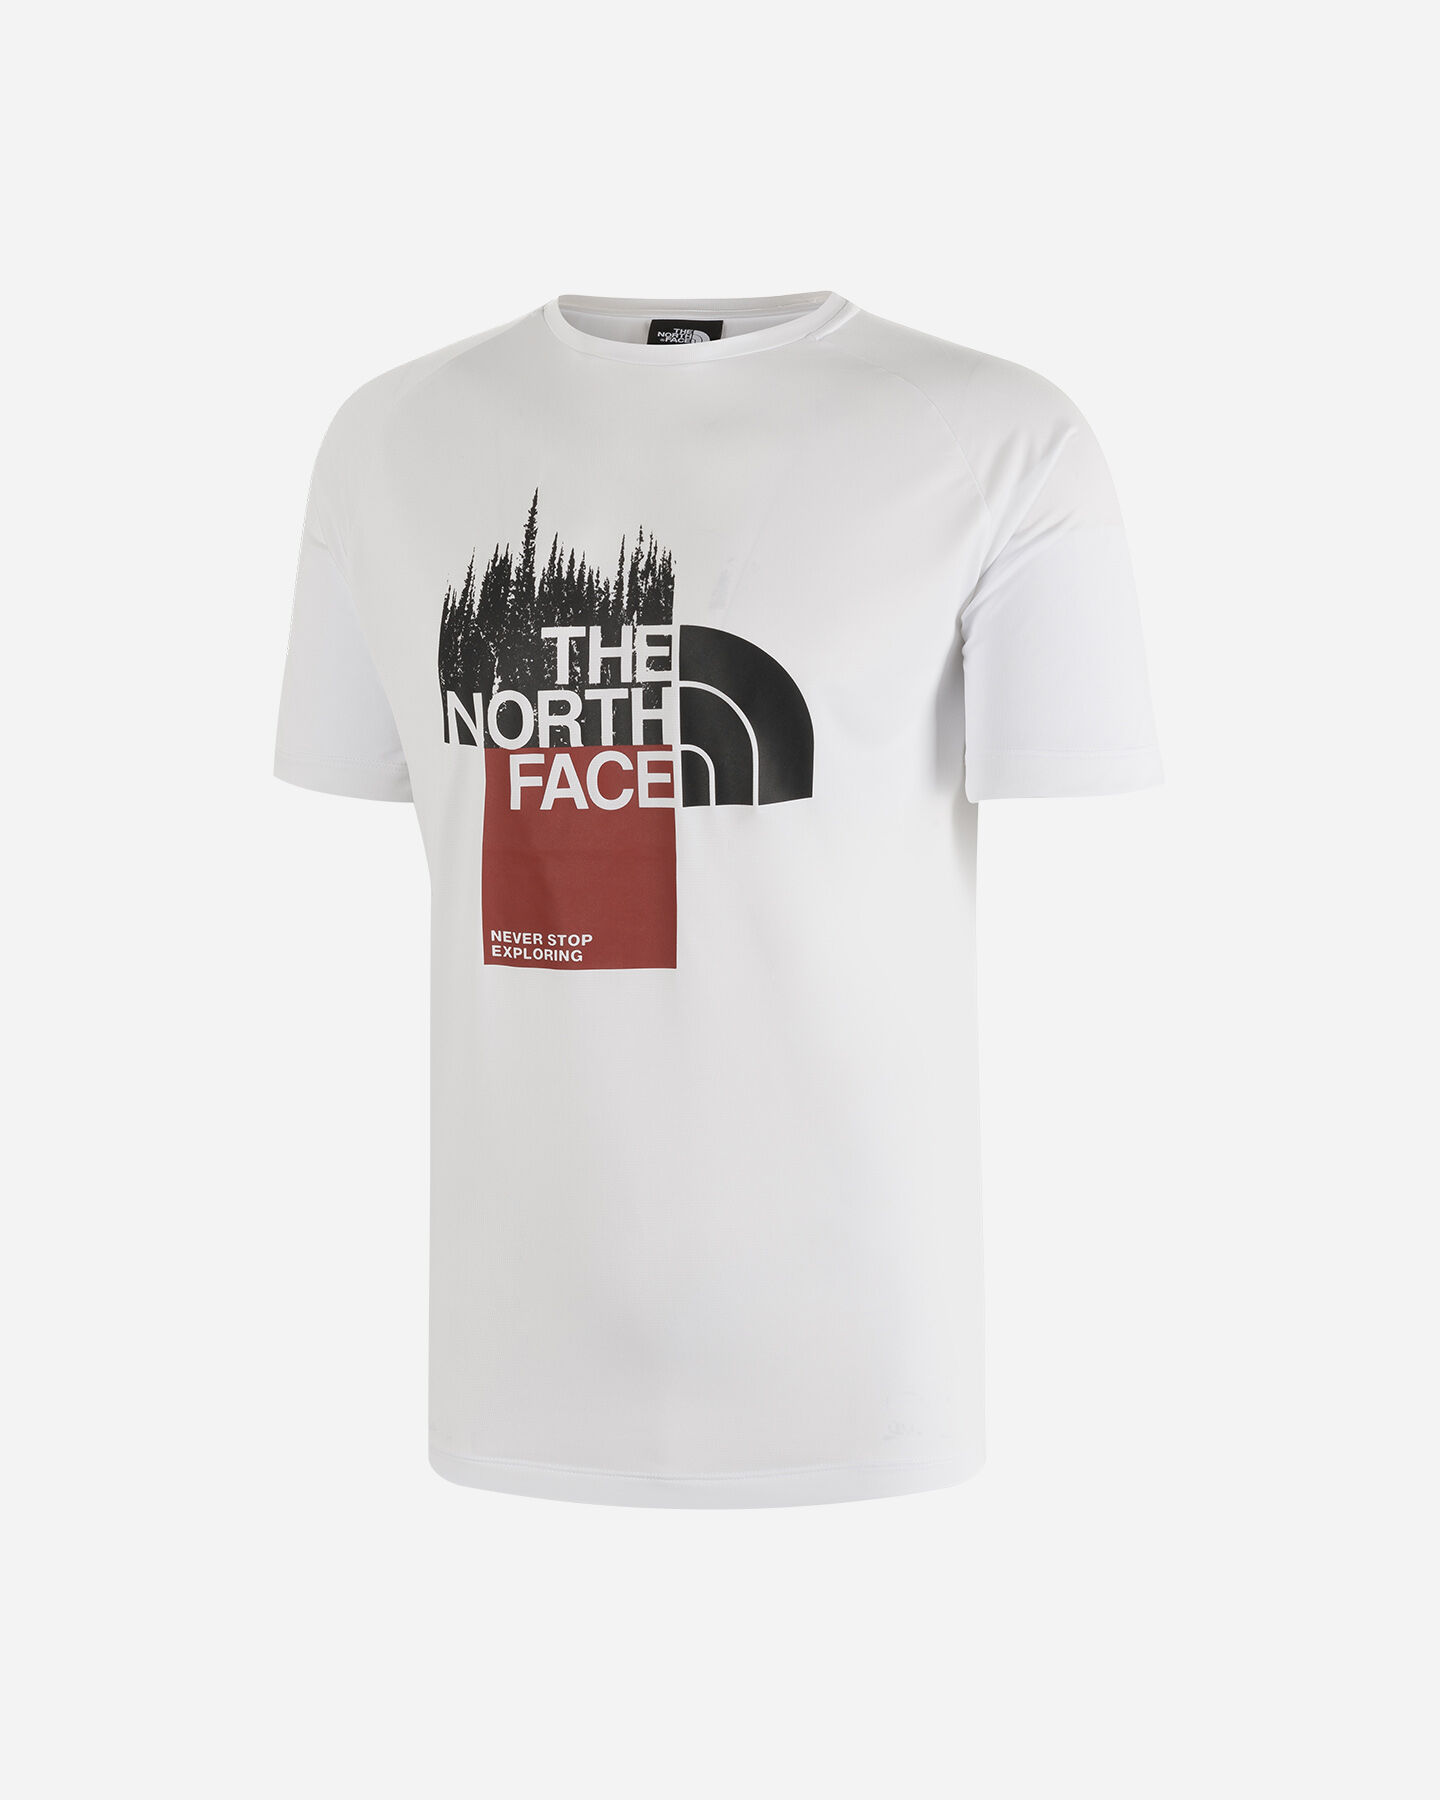  T-Shirt THE NORTH FACE ODLES TECH M S5430742|50D|XXL scatto 0